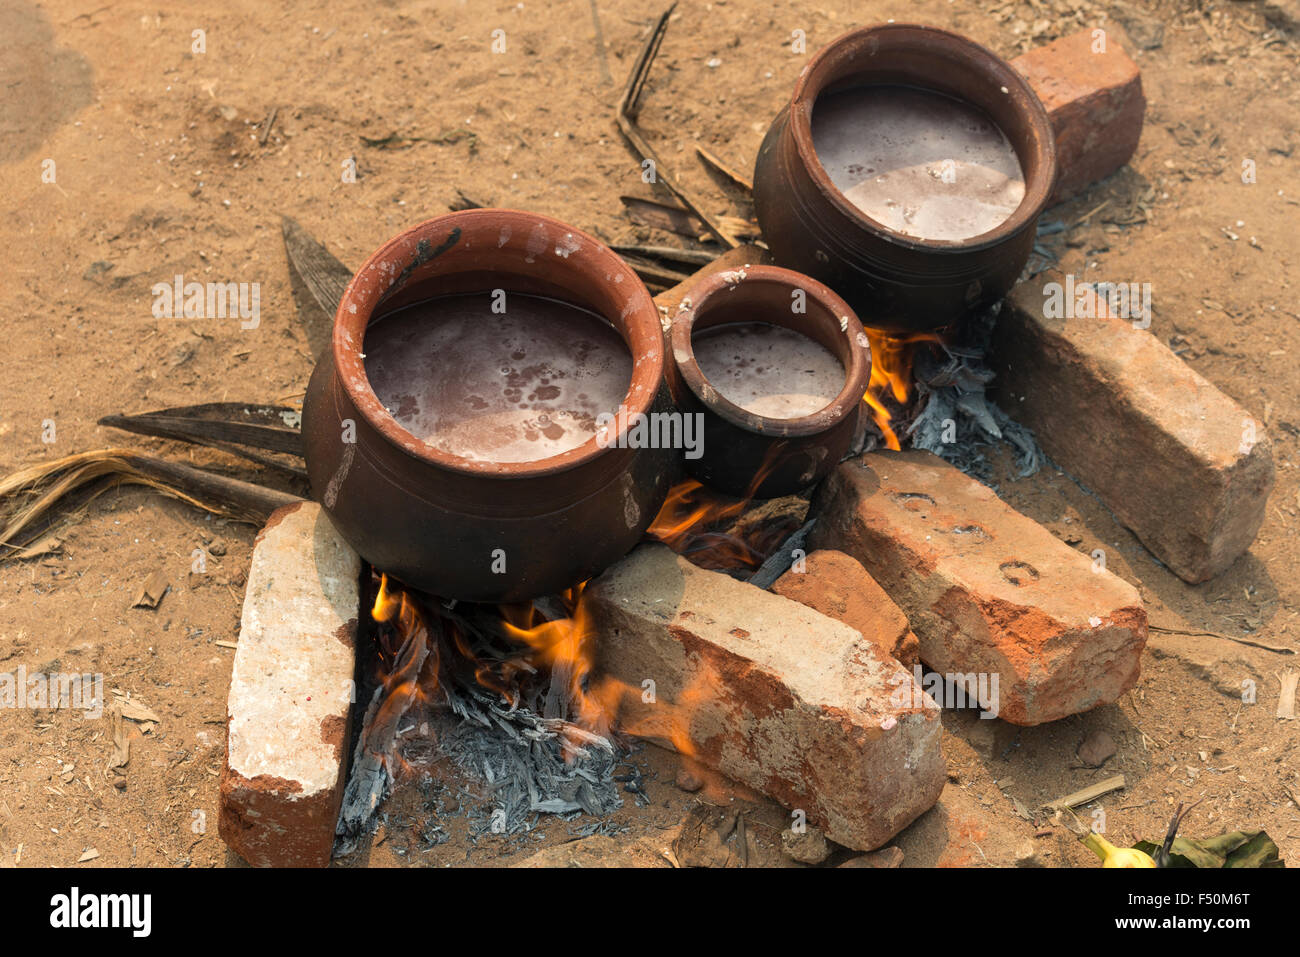 Clay pots are used for cooking in a busy street during the Pongala festival  Stock Photo - Alamy